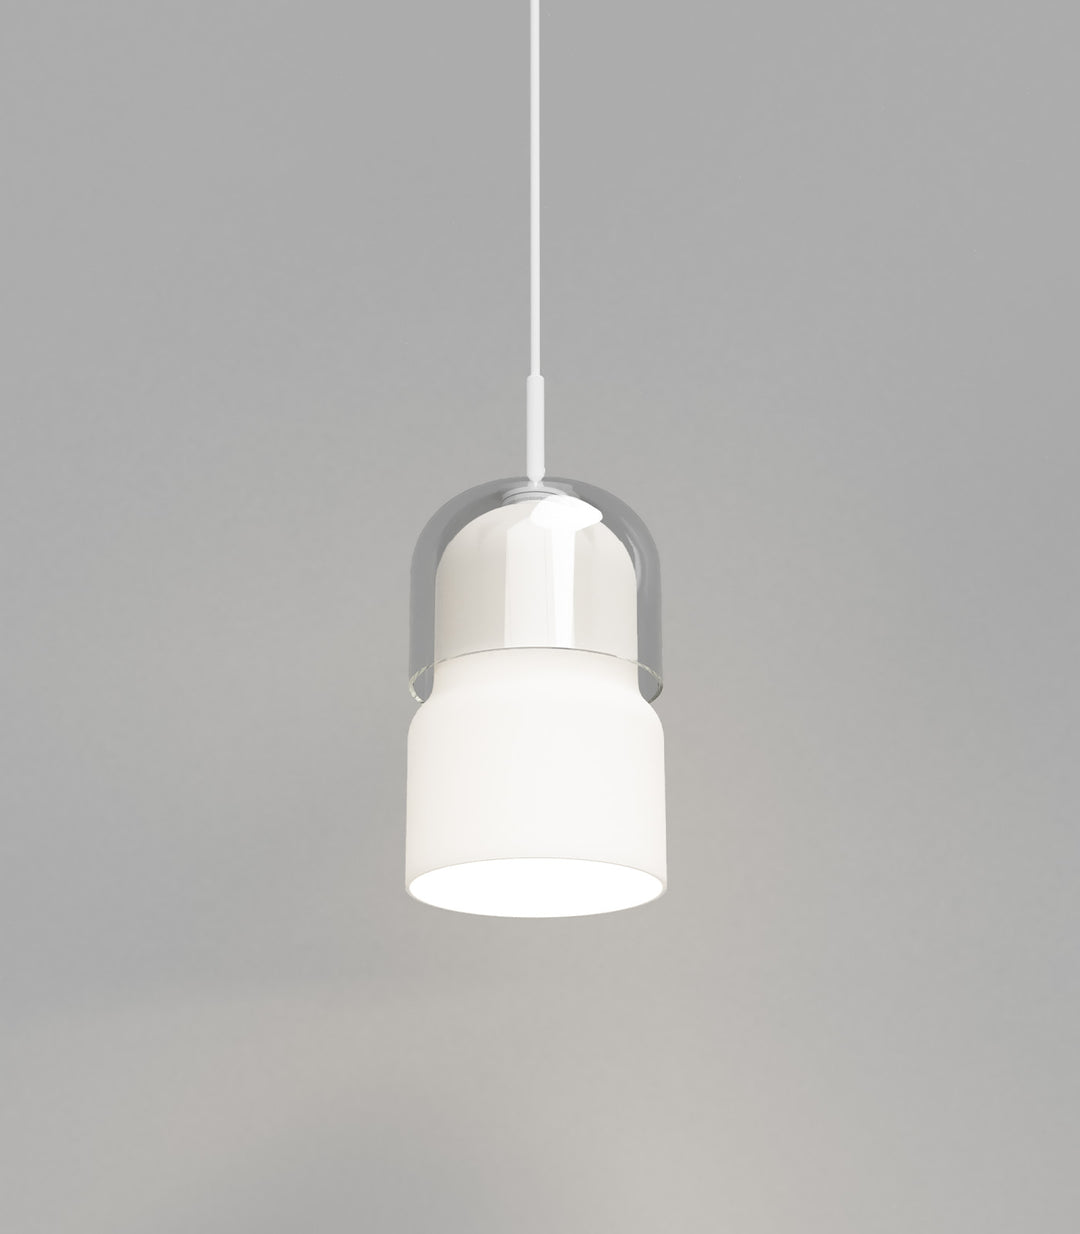 Stak Modular Pendant Top Glass Only Acid Washed White